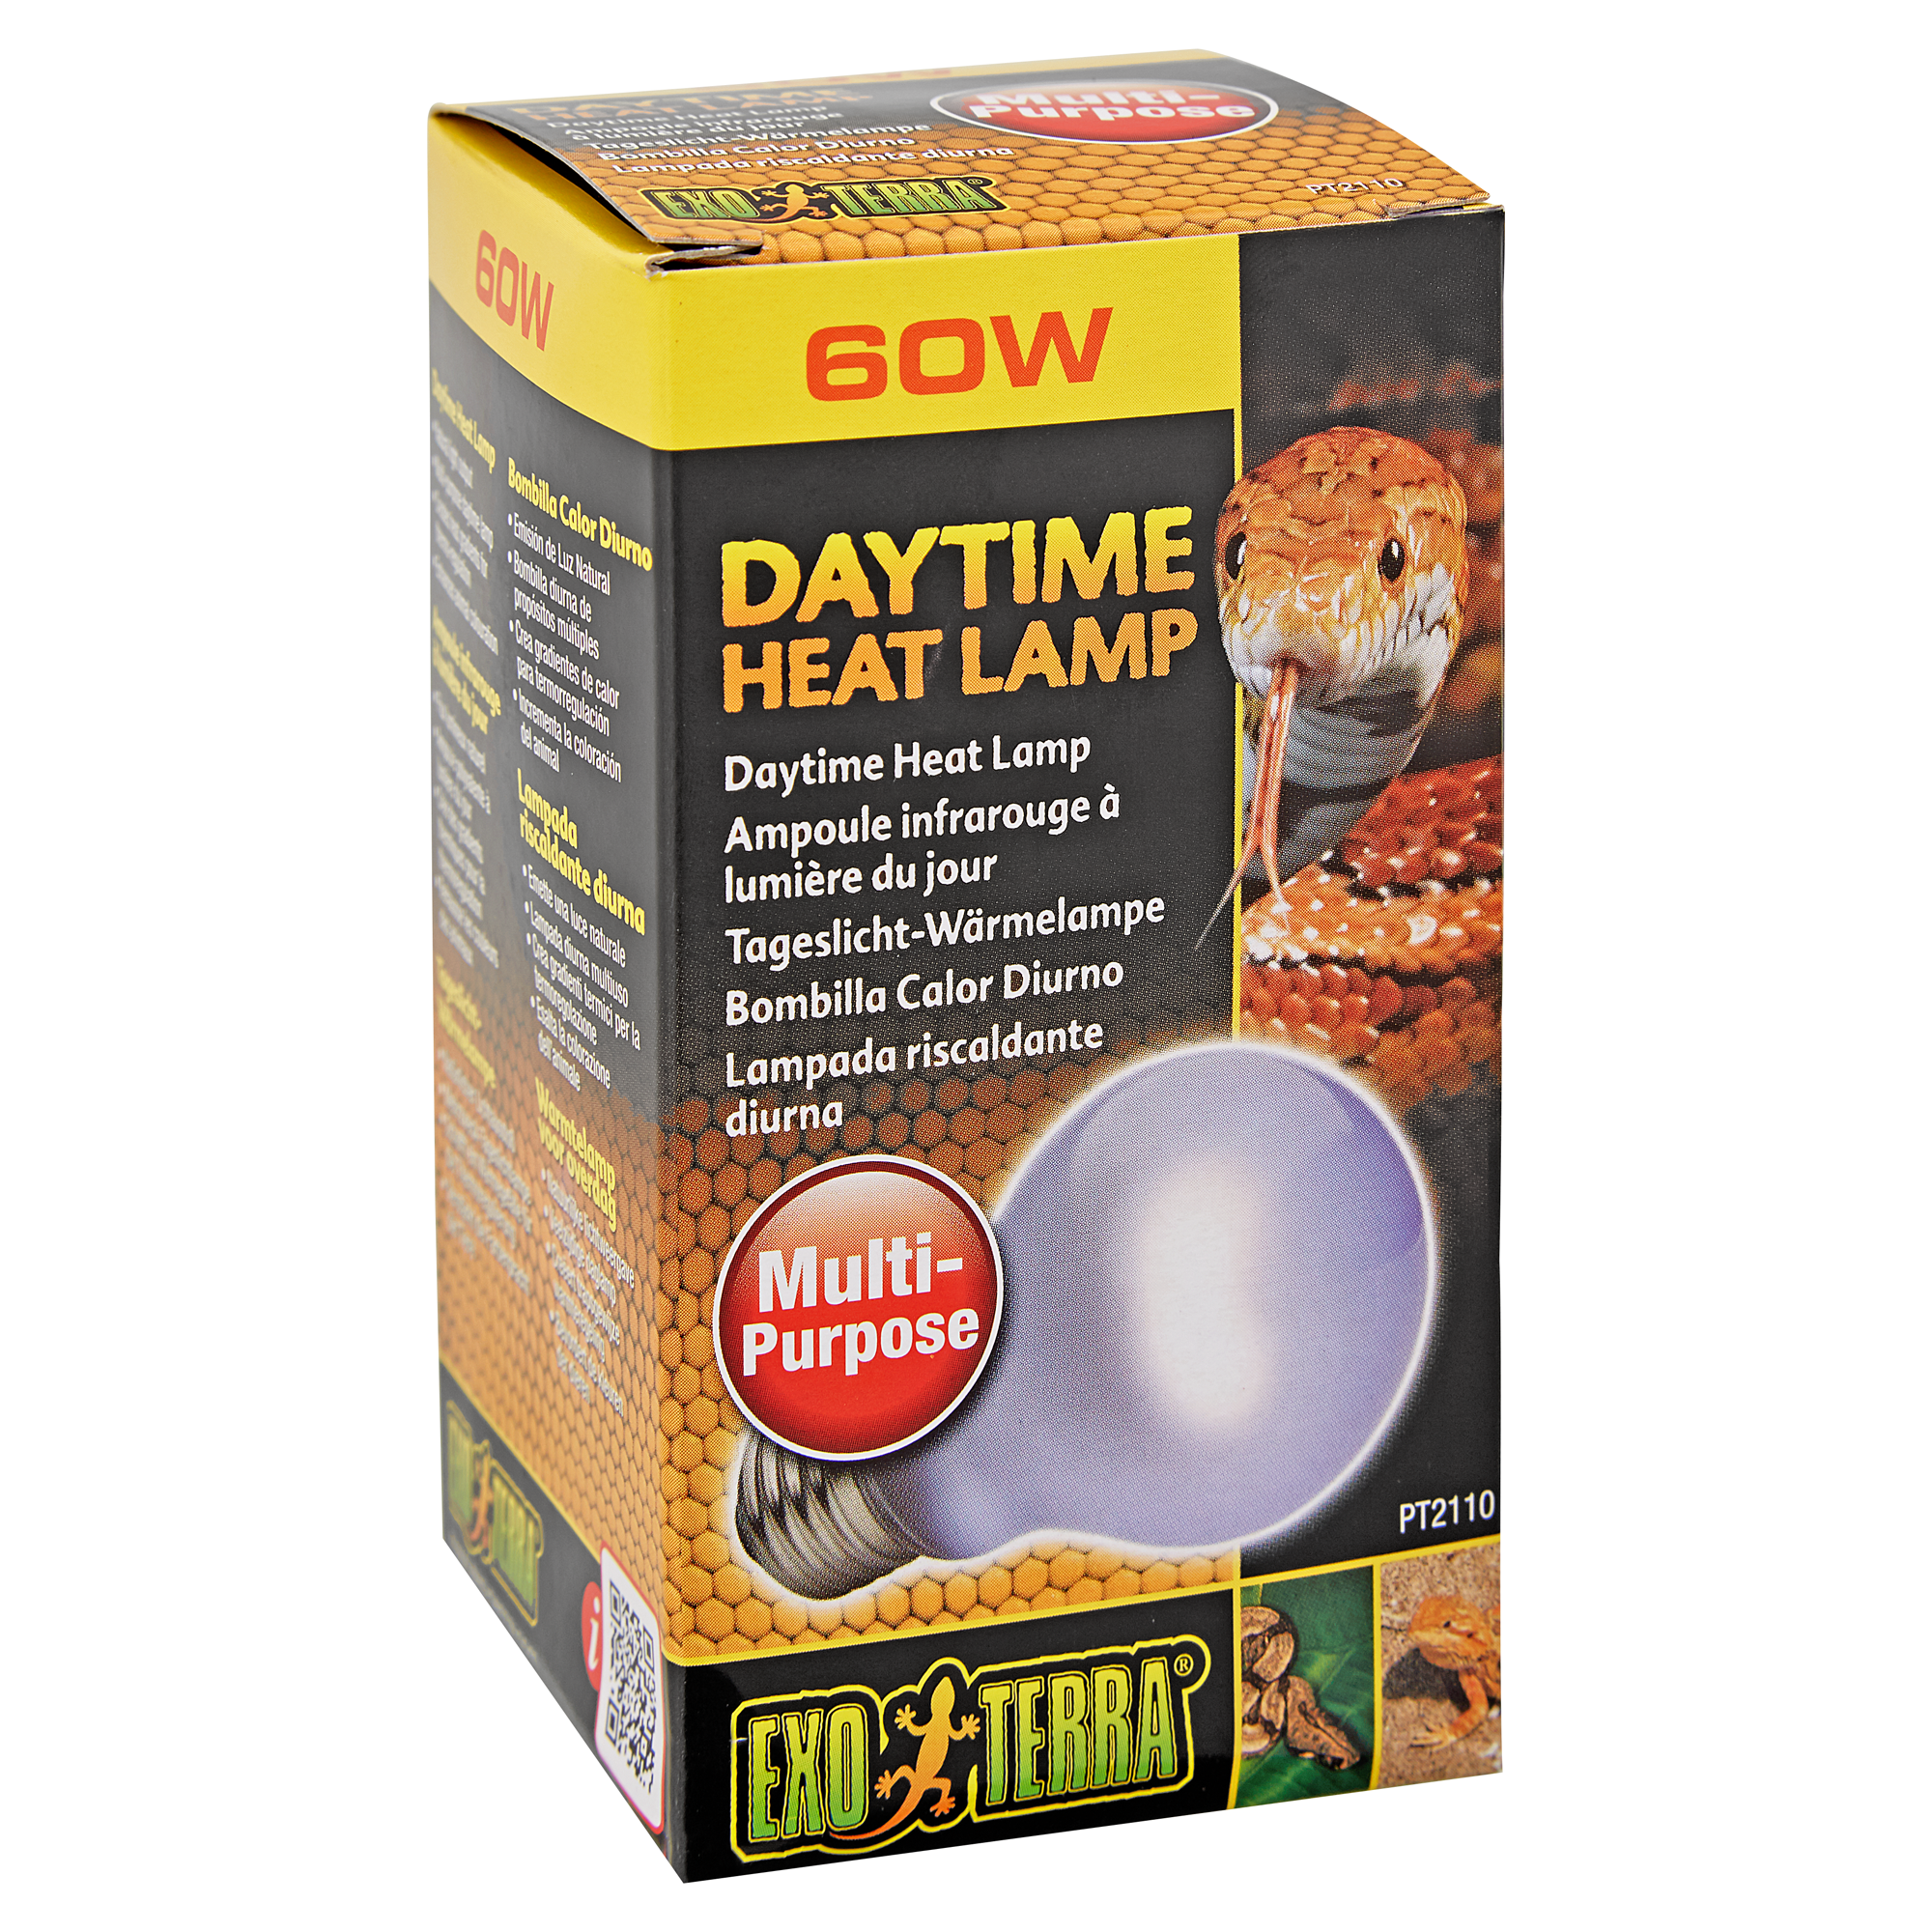 Tageslichtwärmelampe "Daytime Heat Lamp" 60 W + product picture